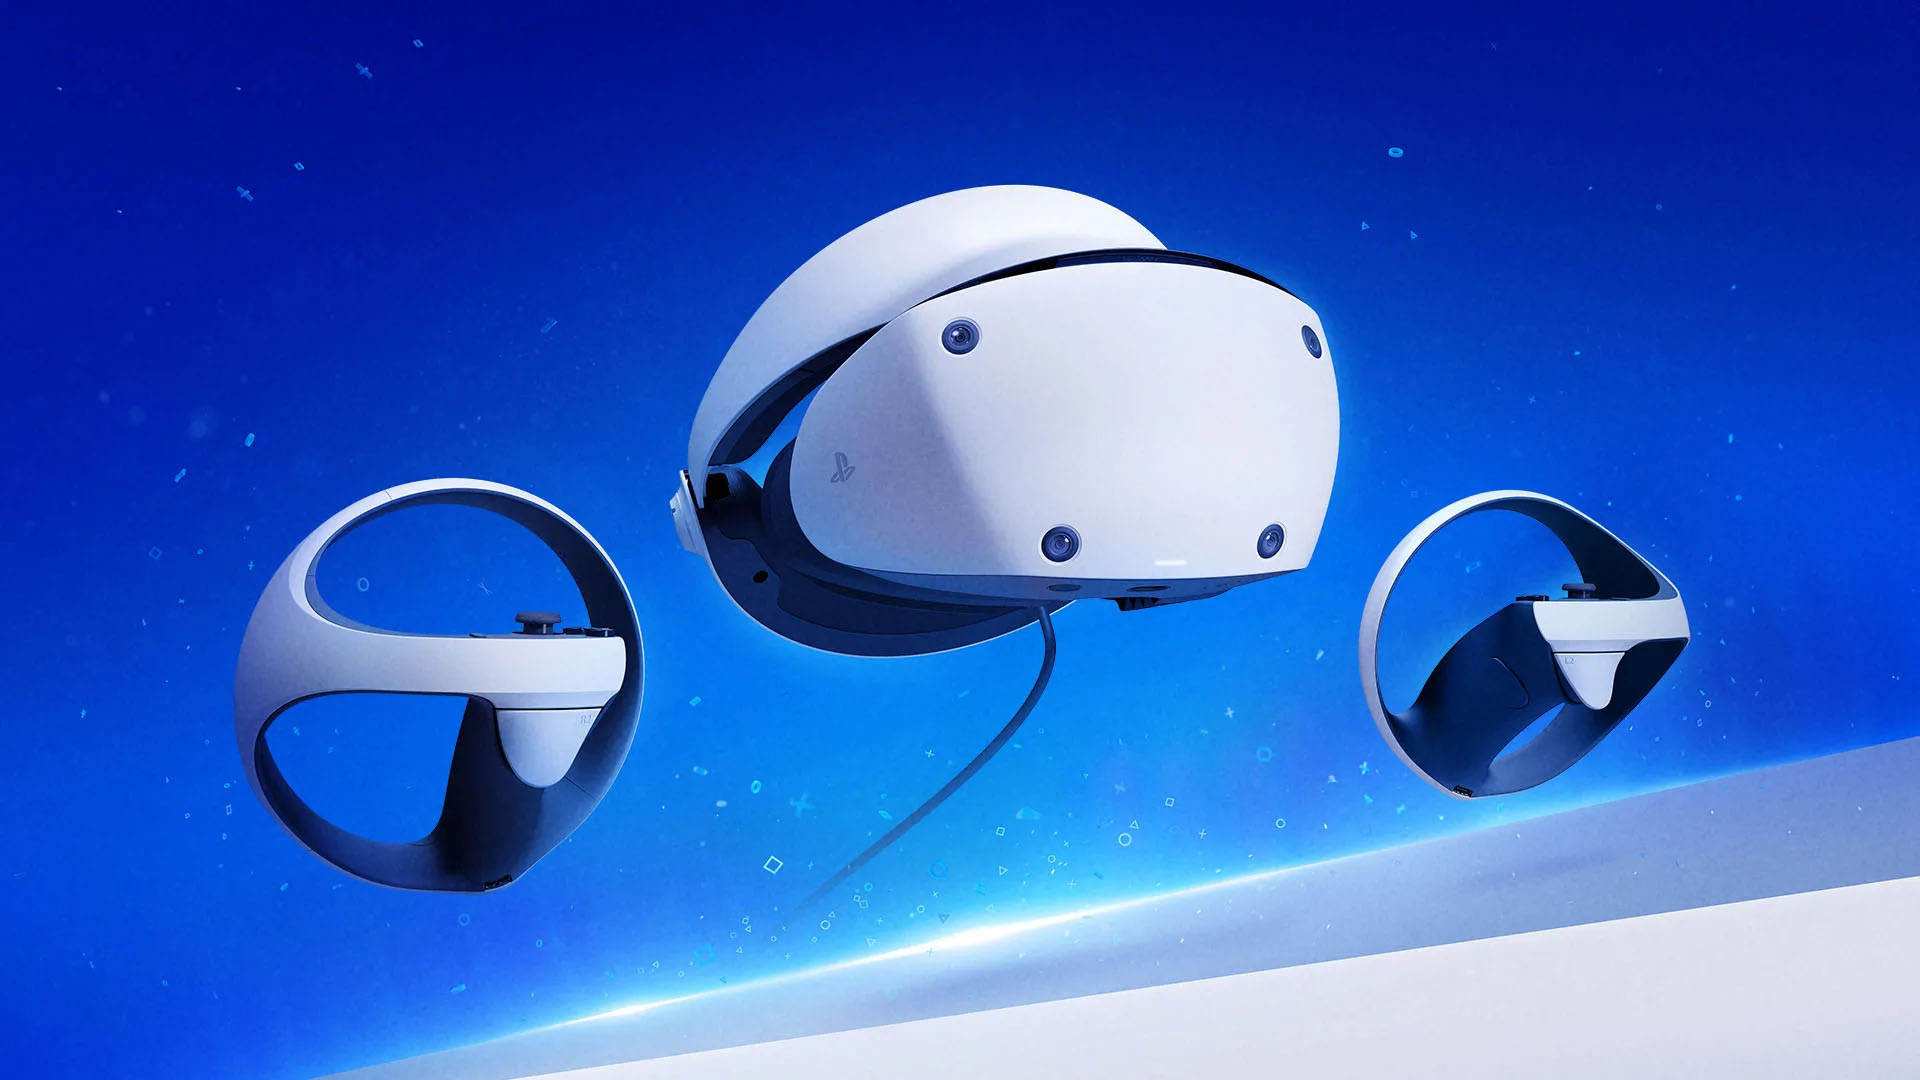 Ian's top 11 PSVR2 launch games that you should play right now